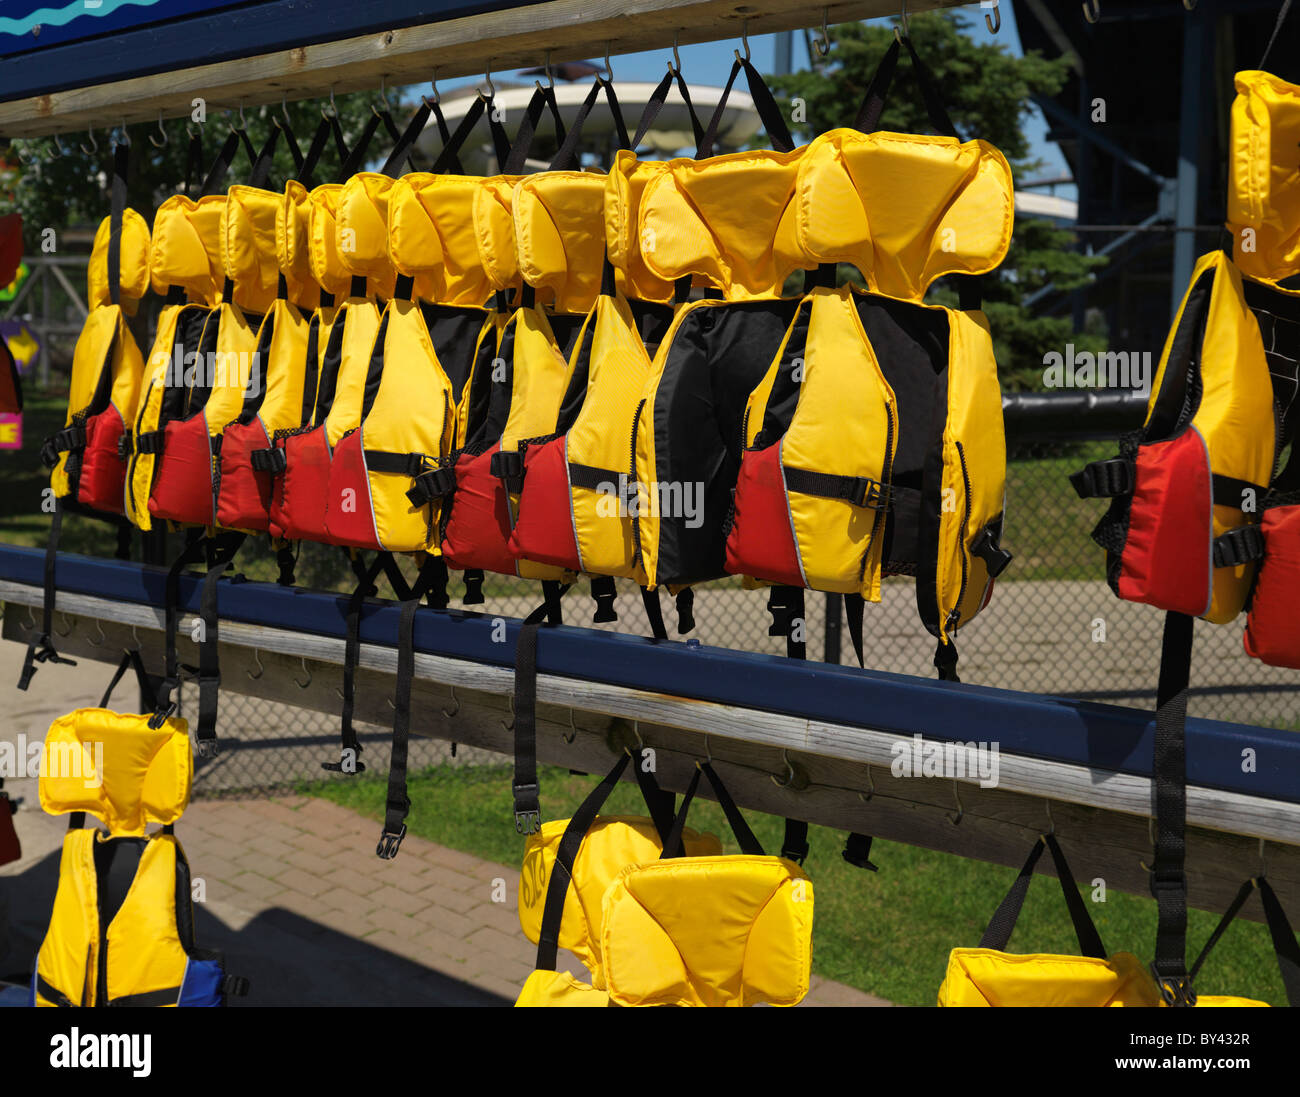 Stand with life jackets, life vests Stock Photo